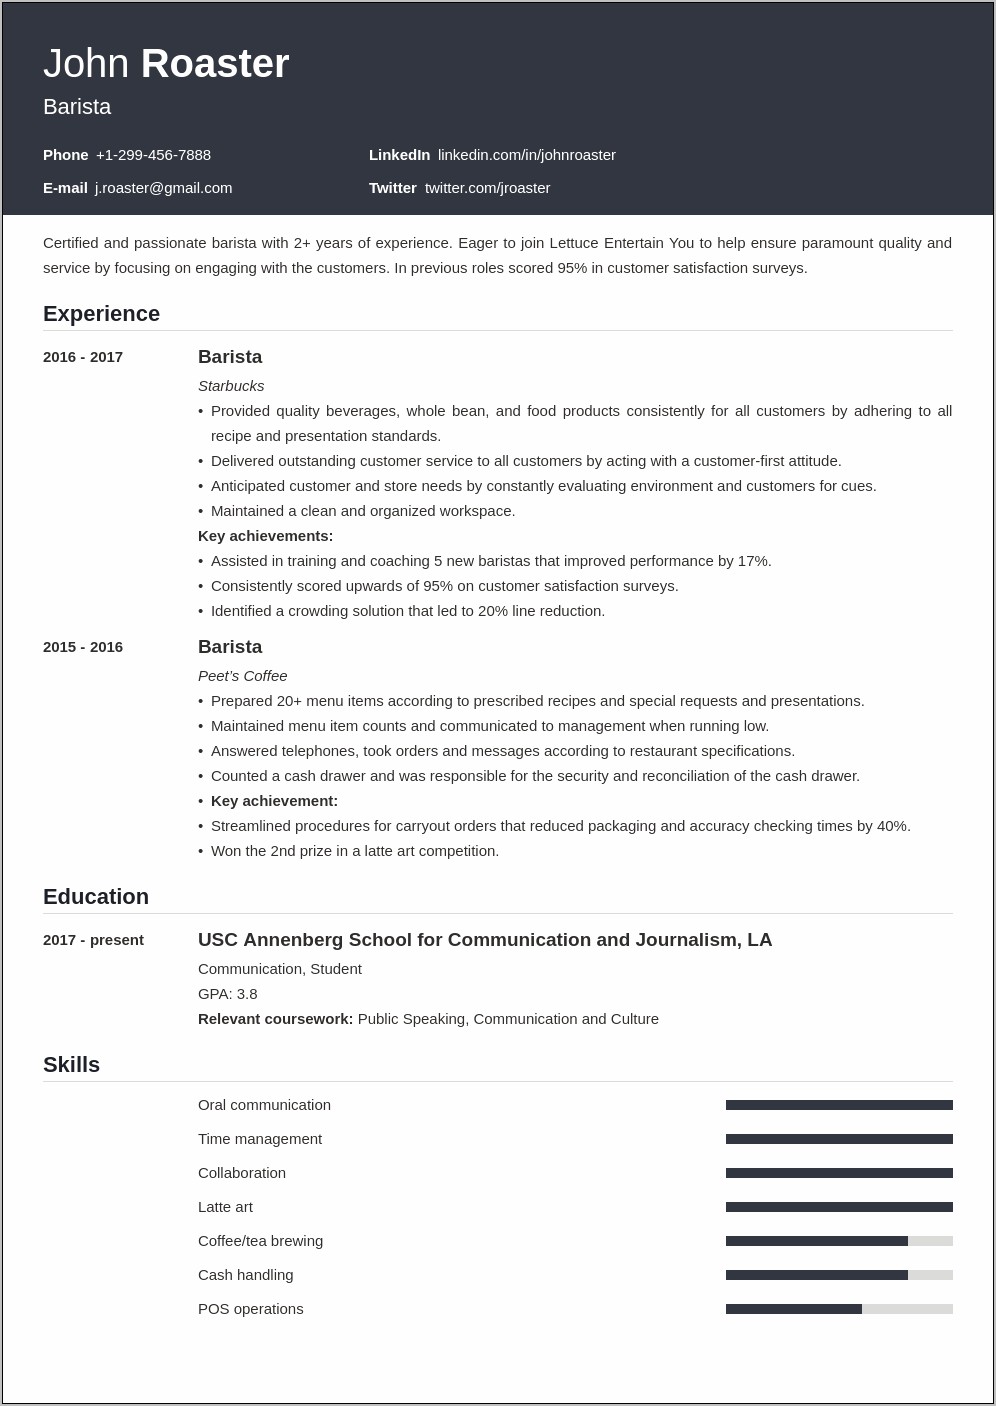 Good Interests Or Hobbies For A Resume